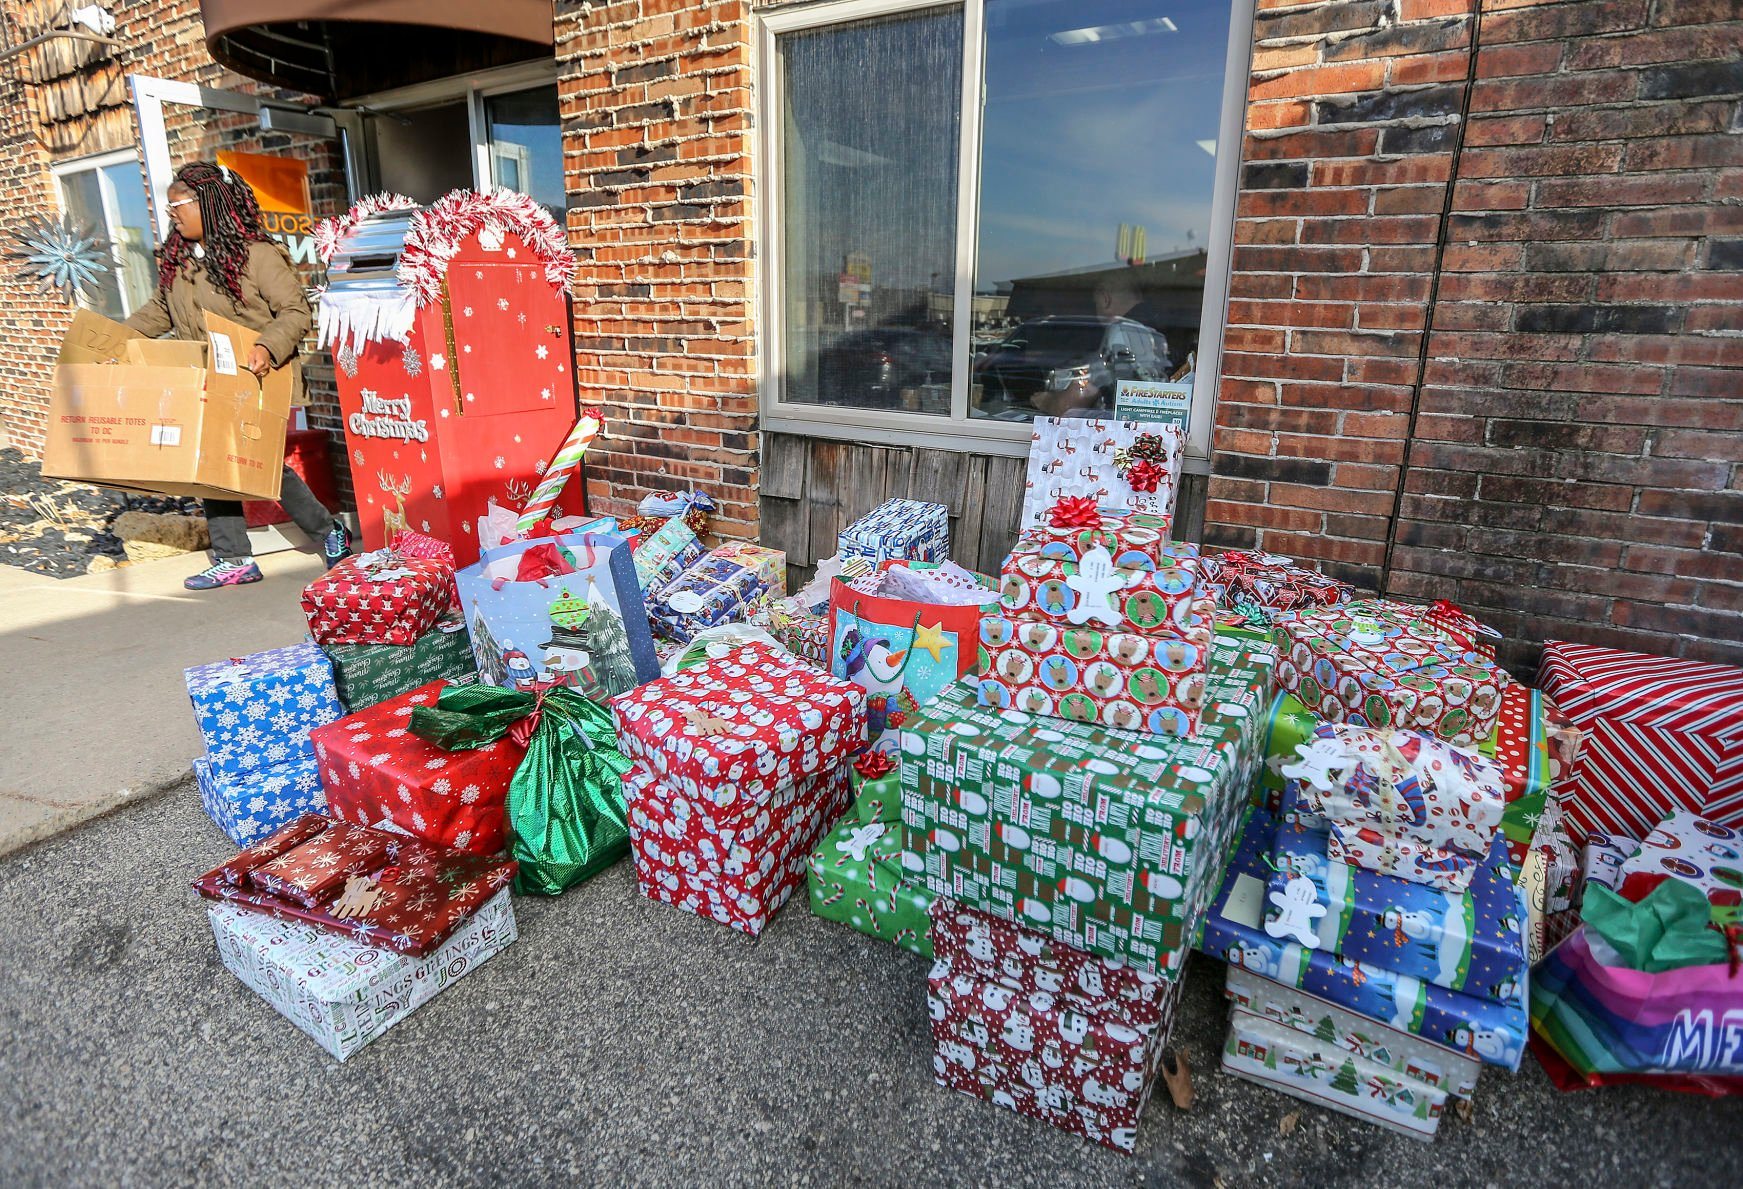 Tiffany Welton, of Dubuque, picks up Christmas gifts at Resources Unite on Monday. The nonprofit provides gifts for families in need. The organization will provide gifts to more than 1,150 kids this holiday season, after serving about 1,000 last year.    PHOTO CREDIT: Dave Kettering